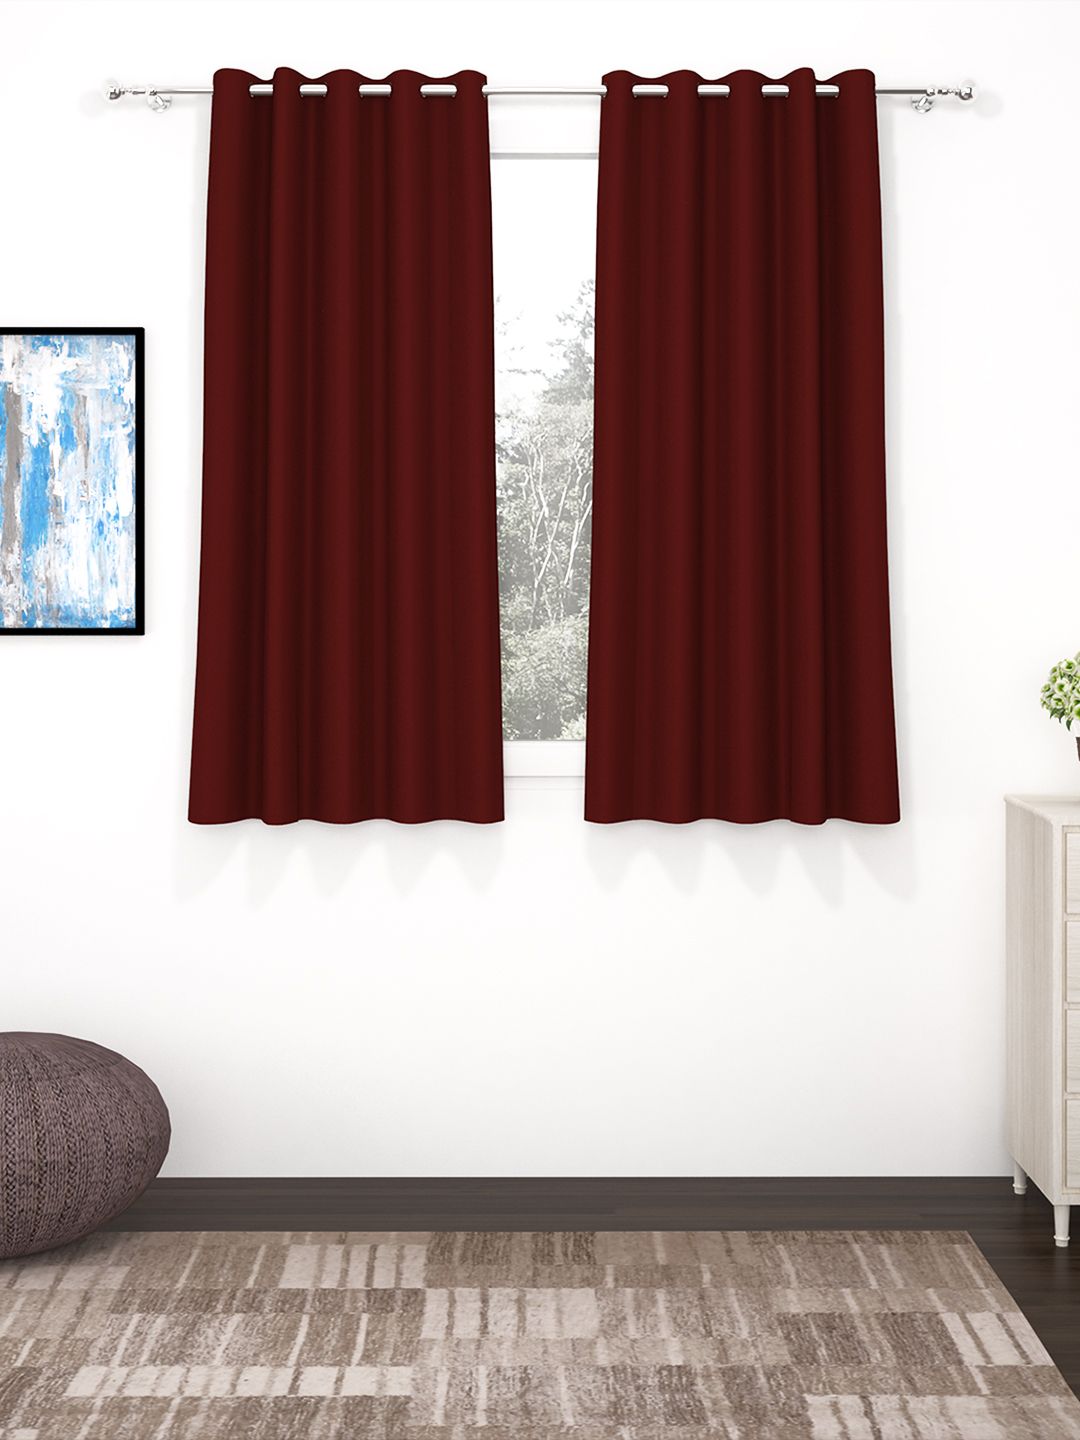 Story@Home Faux Silk Solid Solid 300GSM Maroon Room Darkening Blackout Window Curtain - Set of 2 Price in India